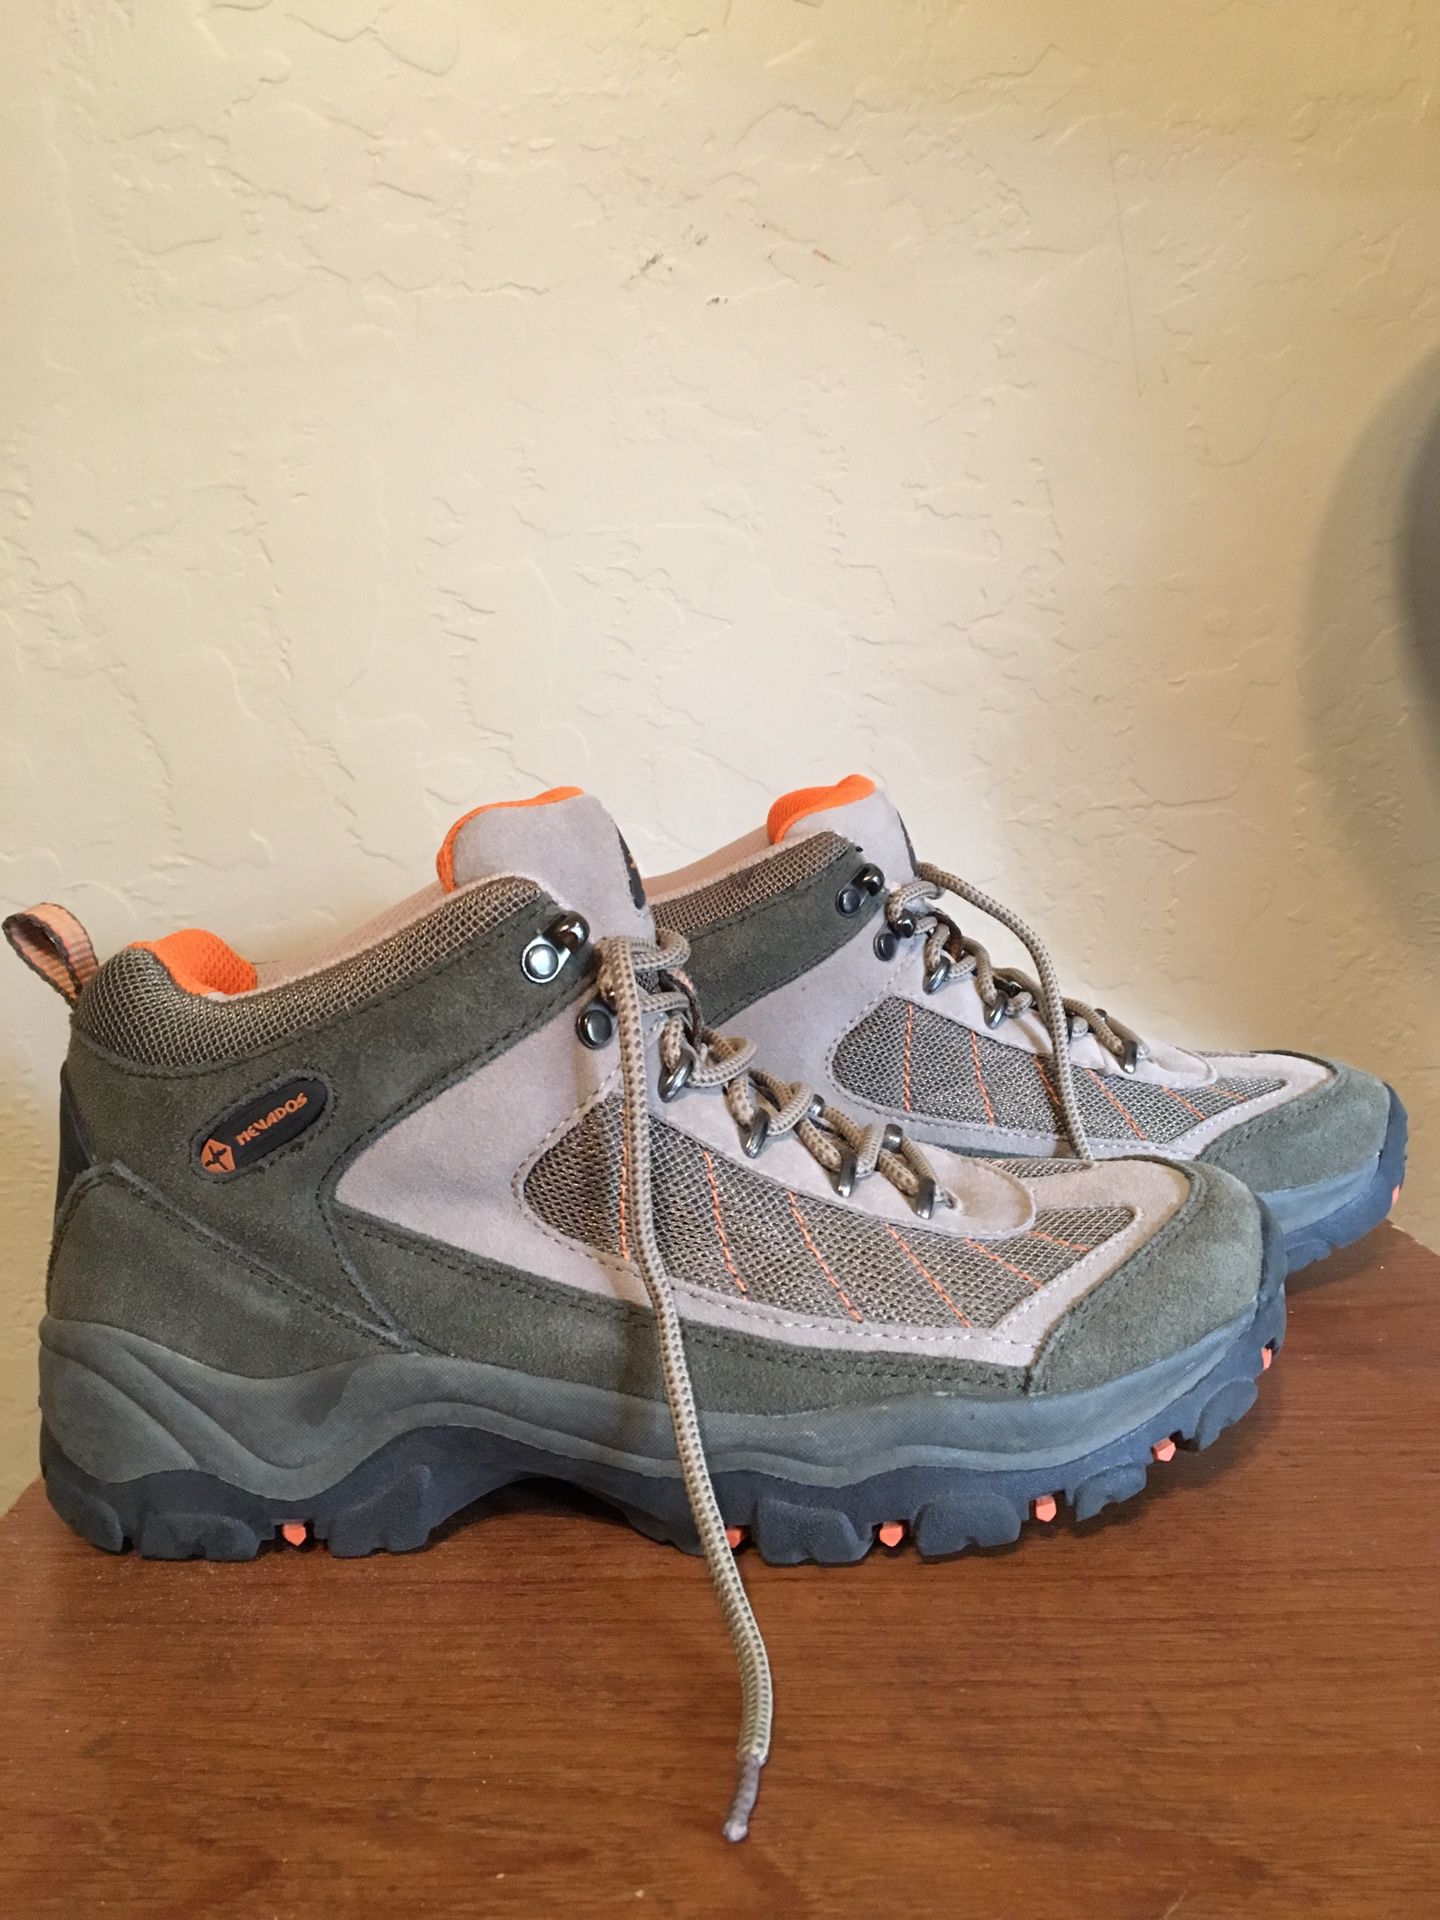 Nevados woman’s size 10 water proof, suede, and other breathable material hiking boots. Worn 1 time, in great condition.